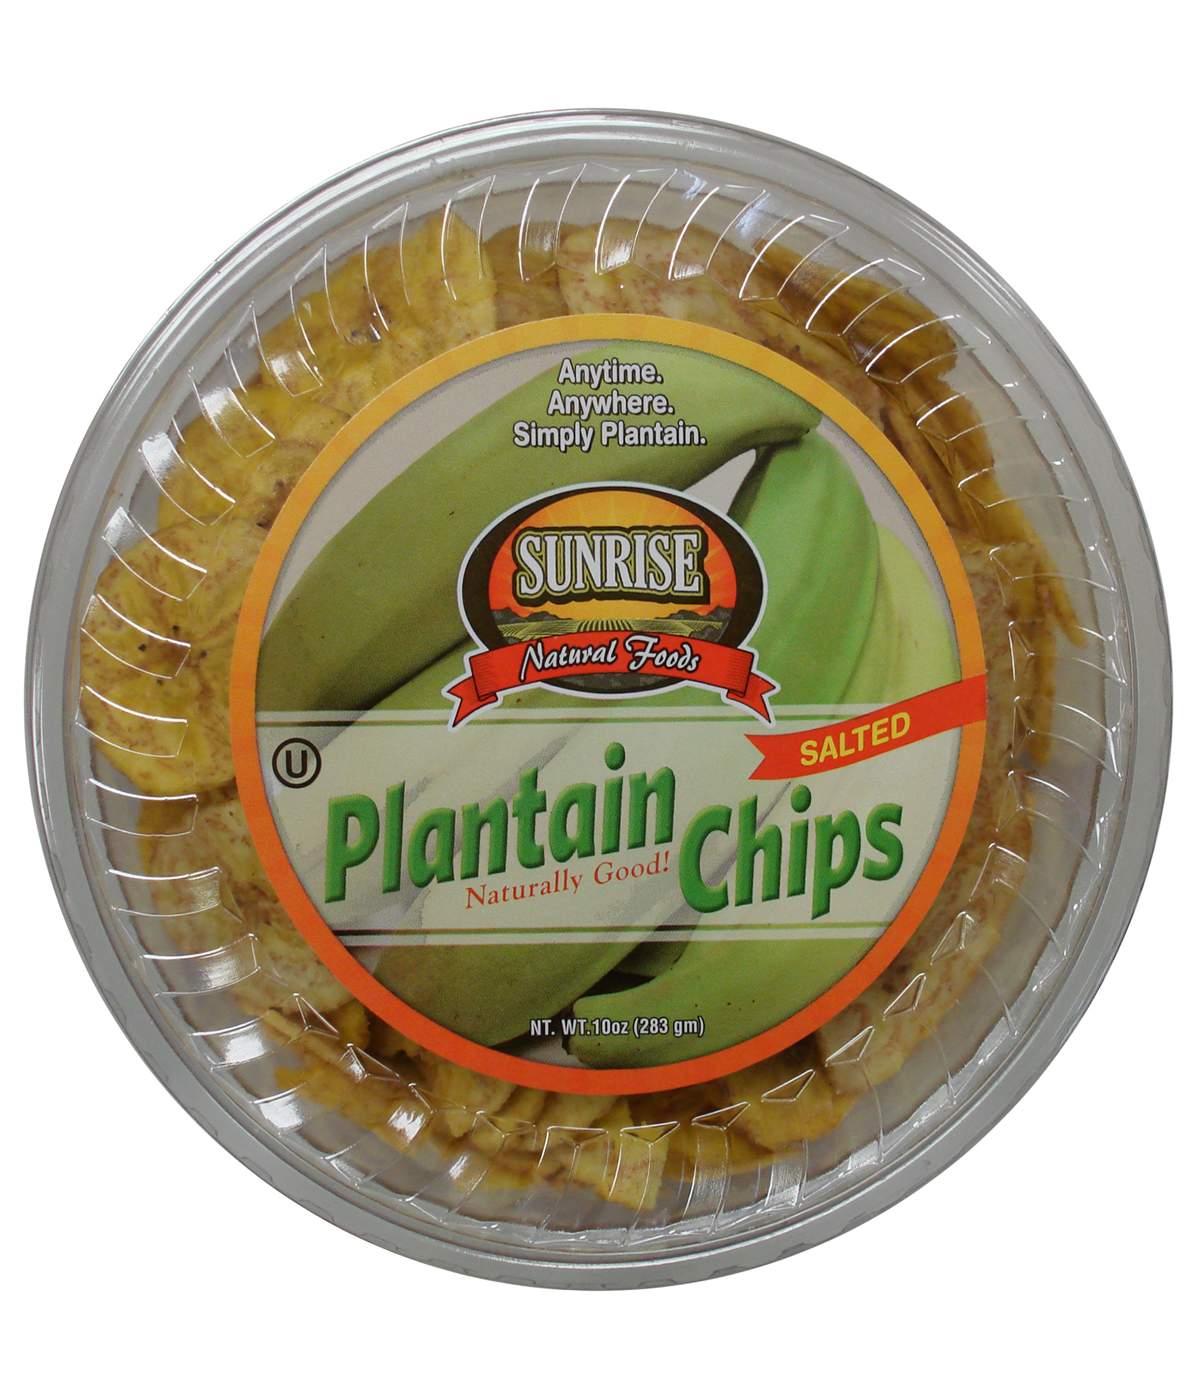 Sunrise Natural Foods Plantain Chips; image 1 of 2